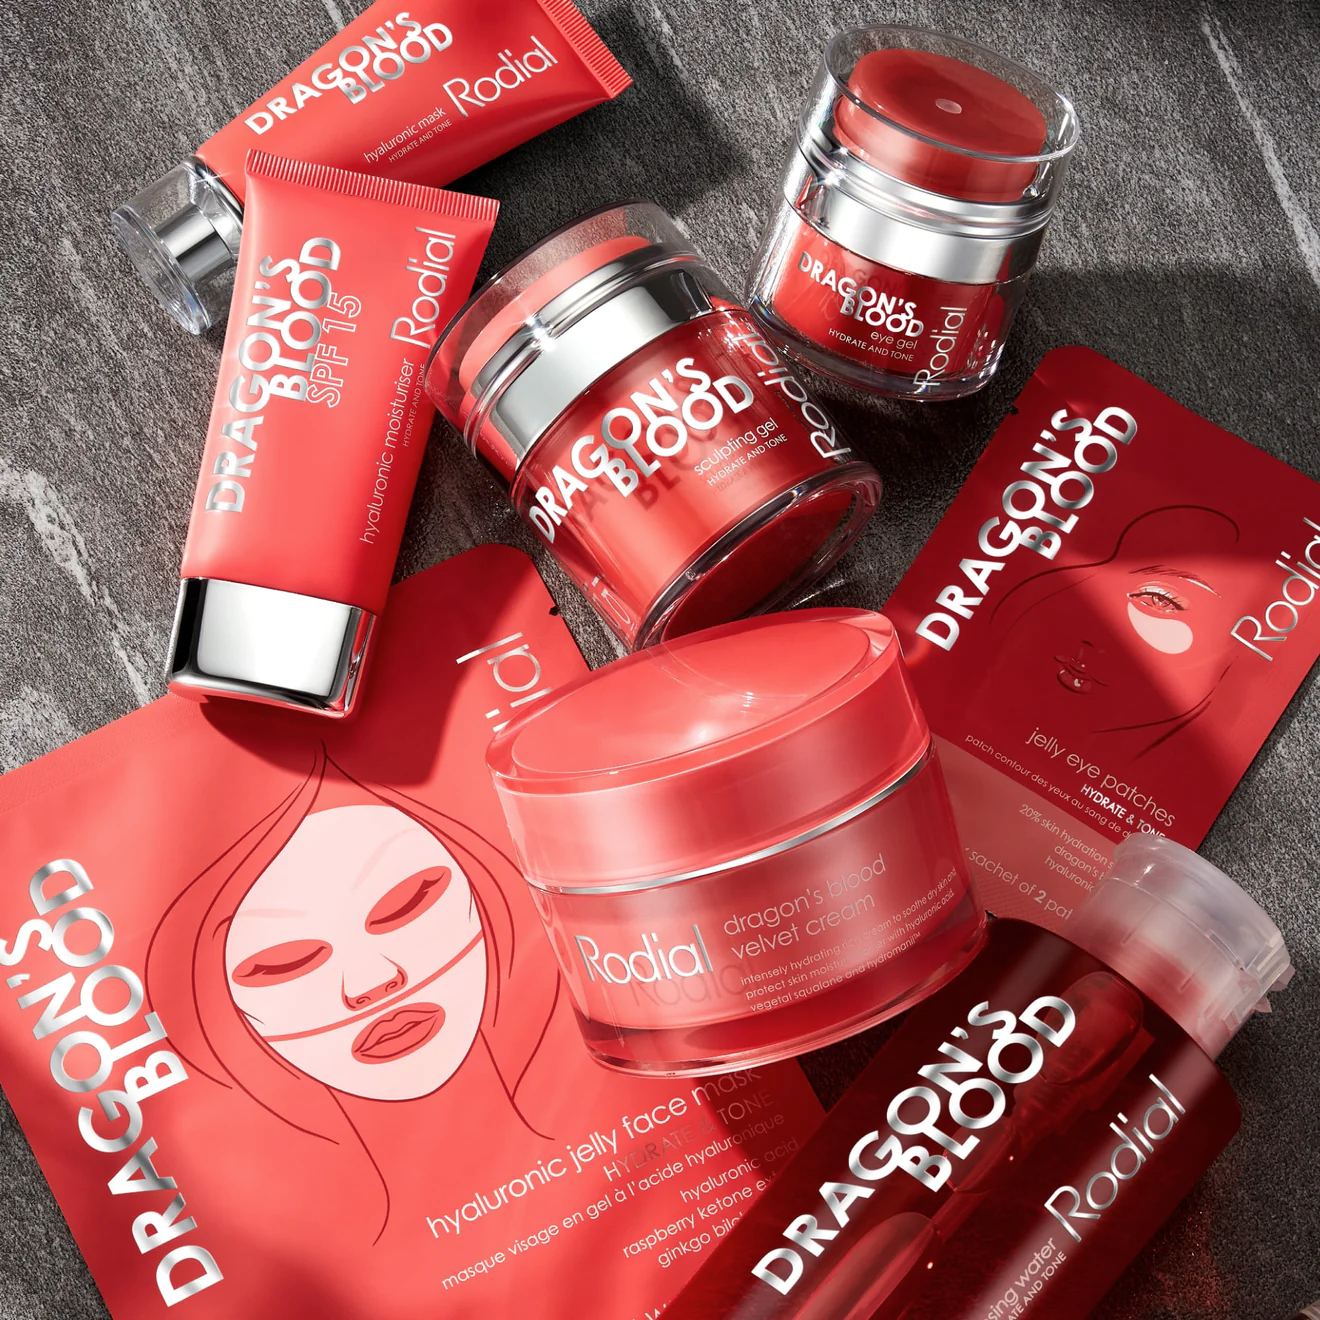 Free Rodial Dragon's Blood Drink Mini with any full size Dragons Blood Product